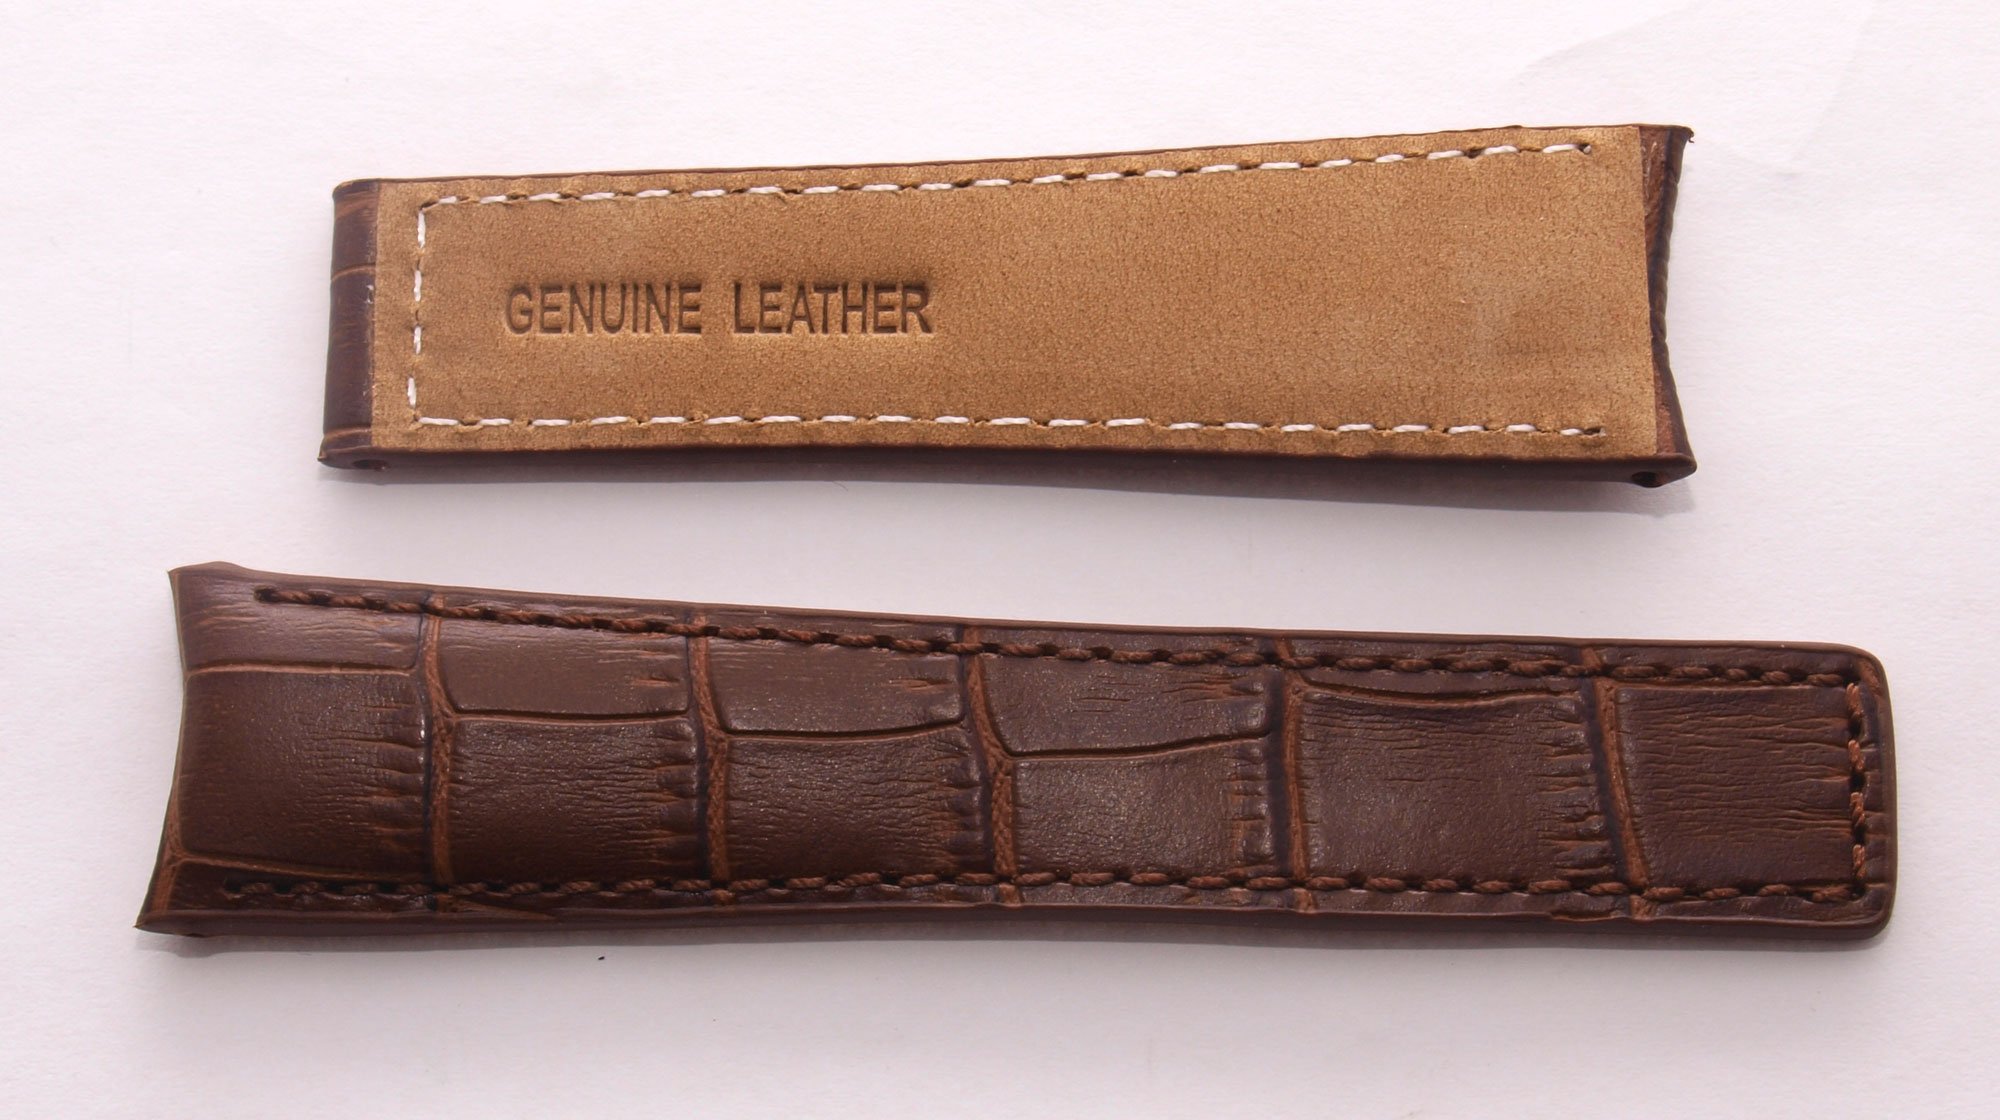 Watchstrapworld TH-GC5037-02-0231 - 22mm Brown Alligator-style Genuine Leather Watchband with Brown Stitching compatible with TAG Heuer Grand Carrera (Spring bars included)